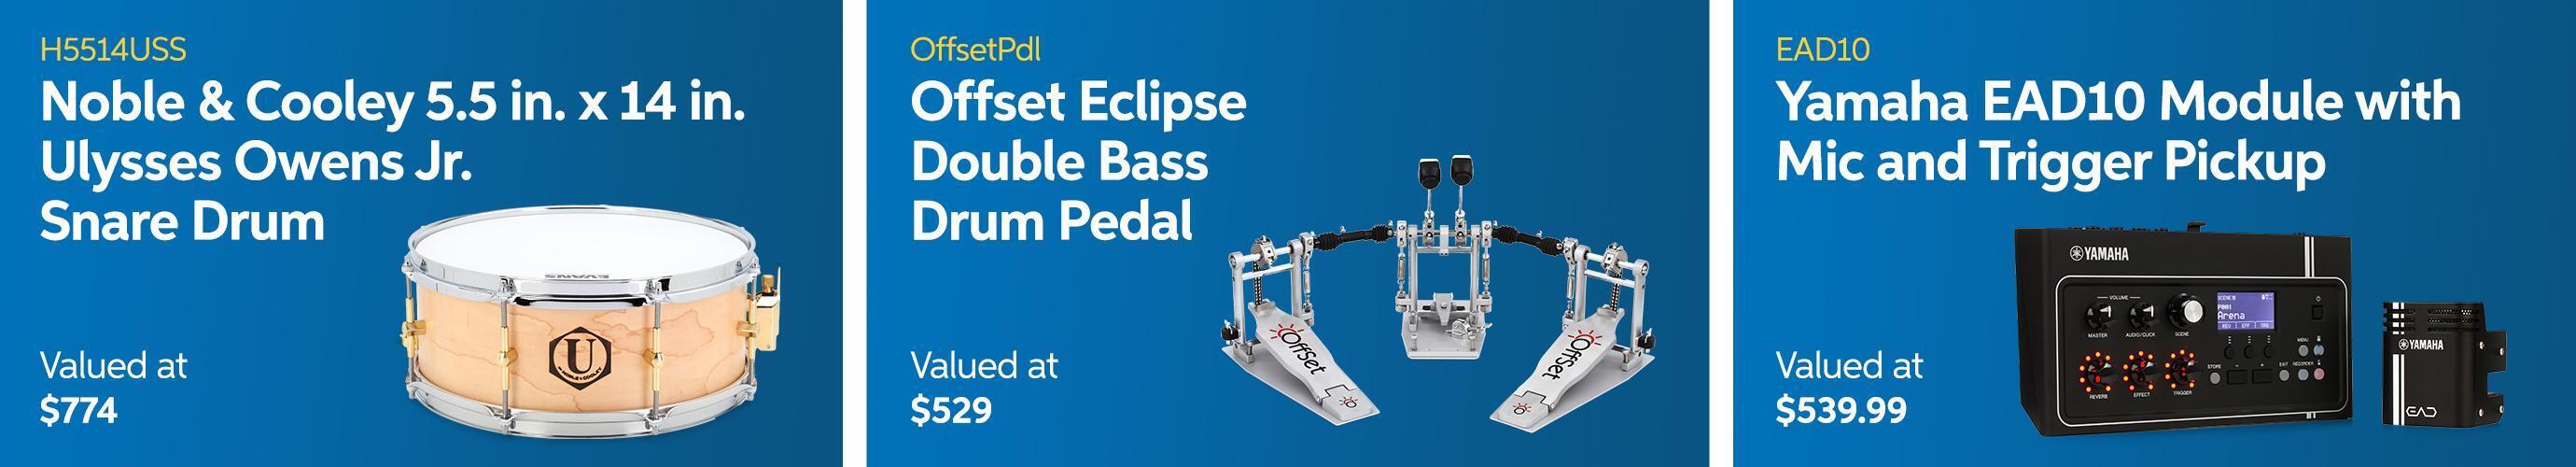 Giveaway - Noble & Cooley 5.5in x14in Ulysses Owens Jr. Snare Drum - Valued At $774.00 | Giveaway - Offset Eclipse Double Bass Drum Pedal - Valued At $529.00 | Giveaway - Yamaha EAD10 Module with Mic and Trigger Pickup - Valued At $539.99